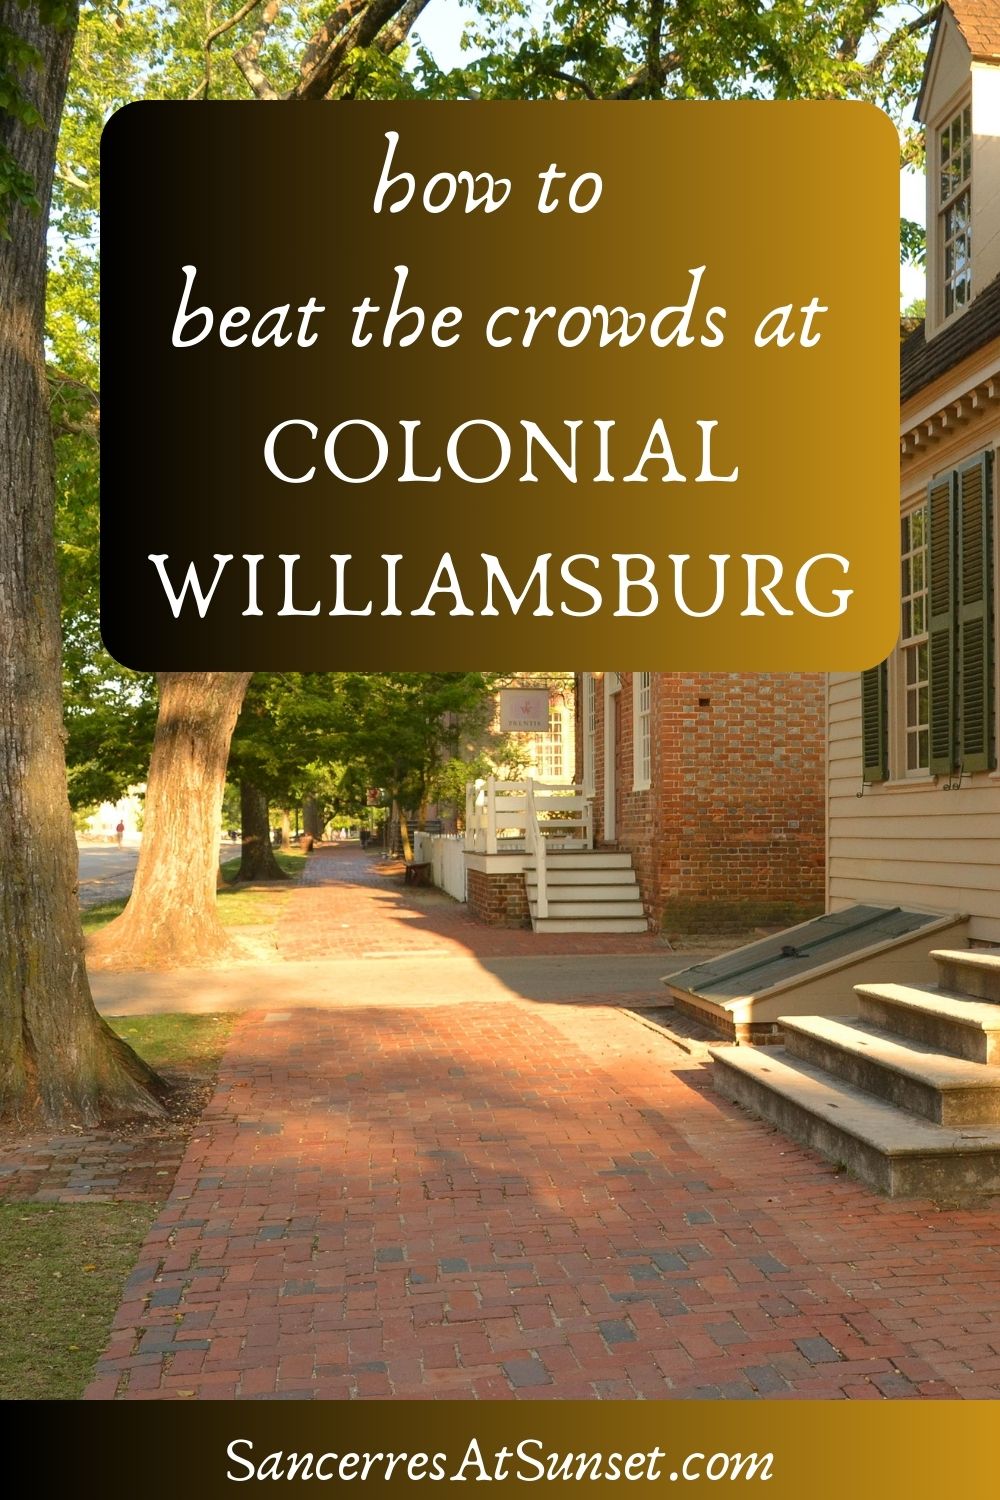 How to Beat the Crowds at Colonial Williamsburg